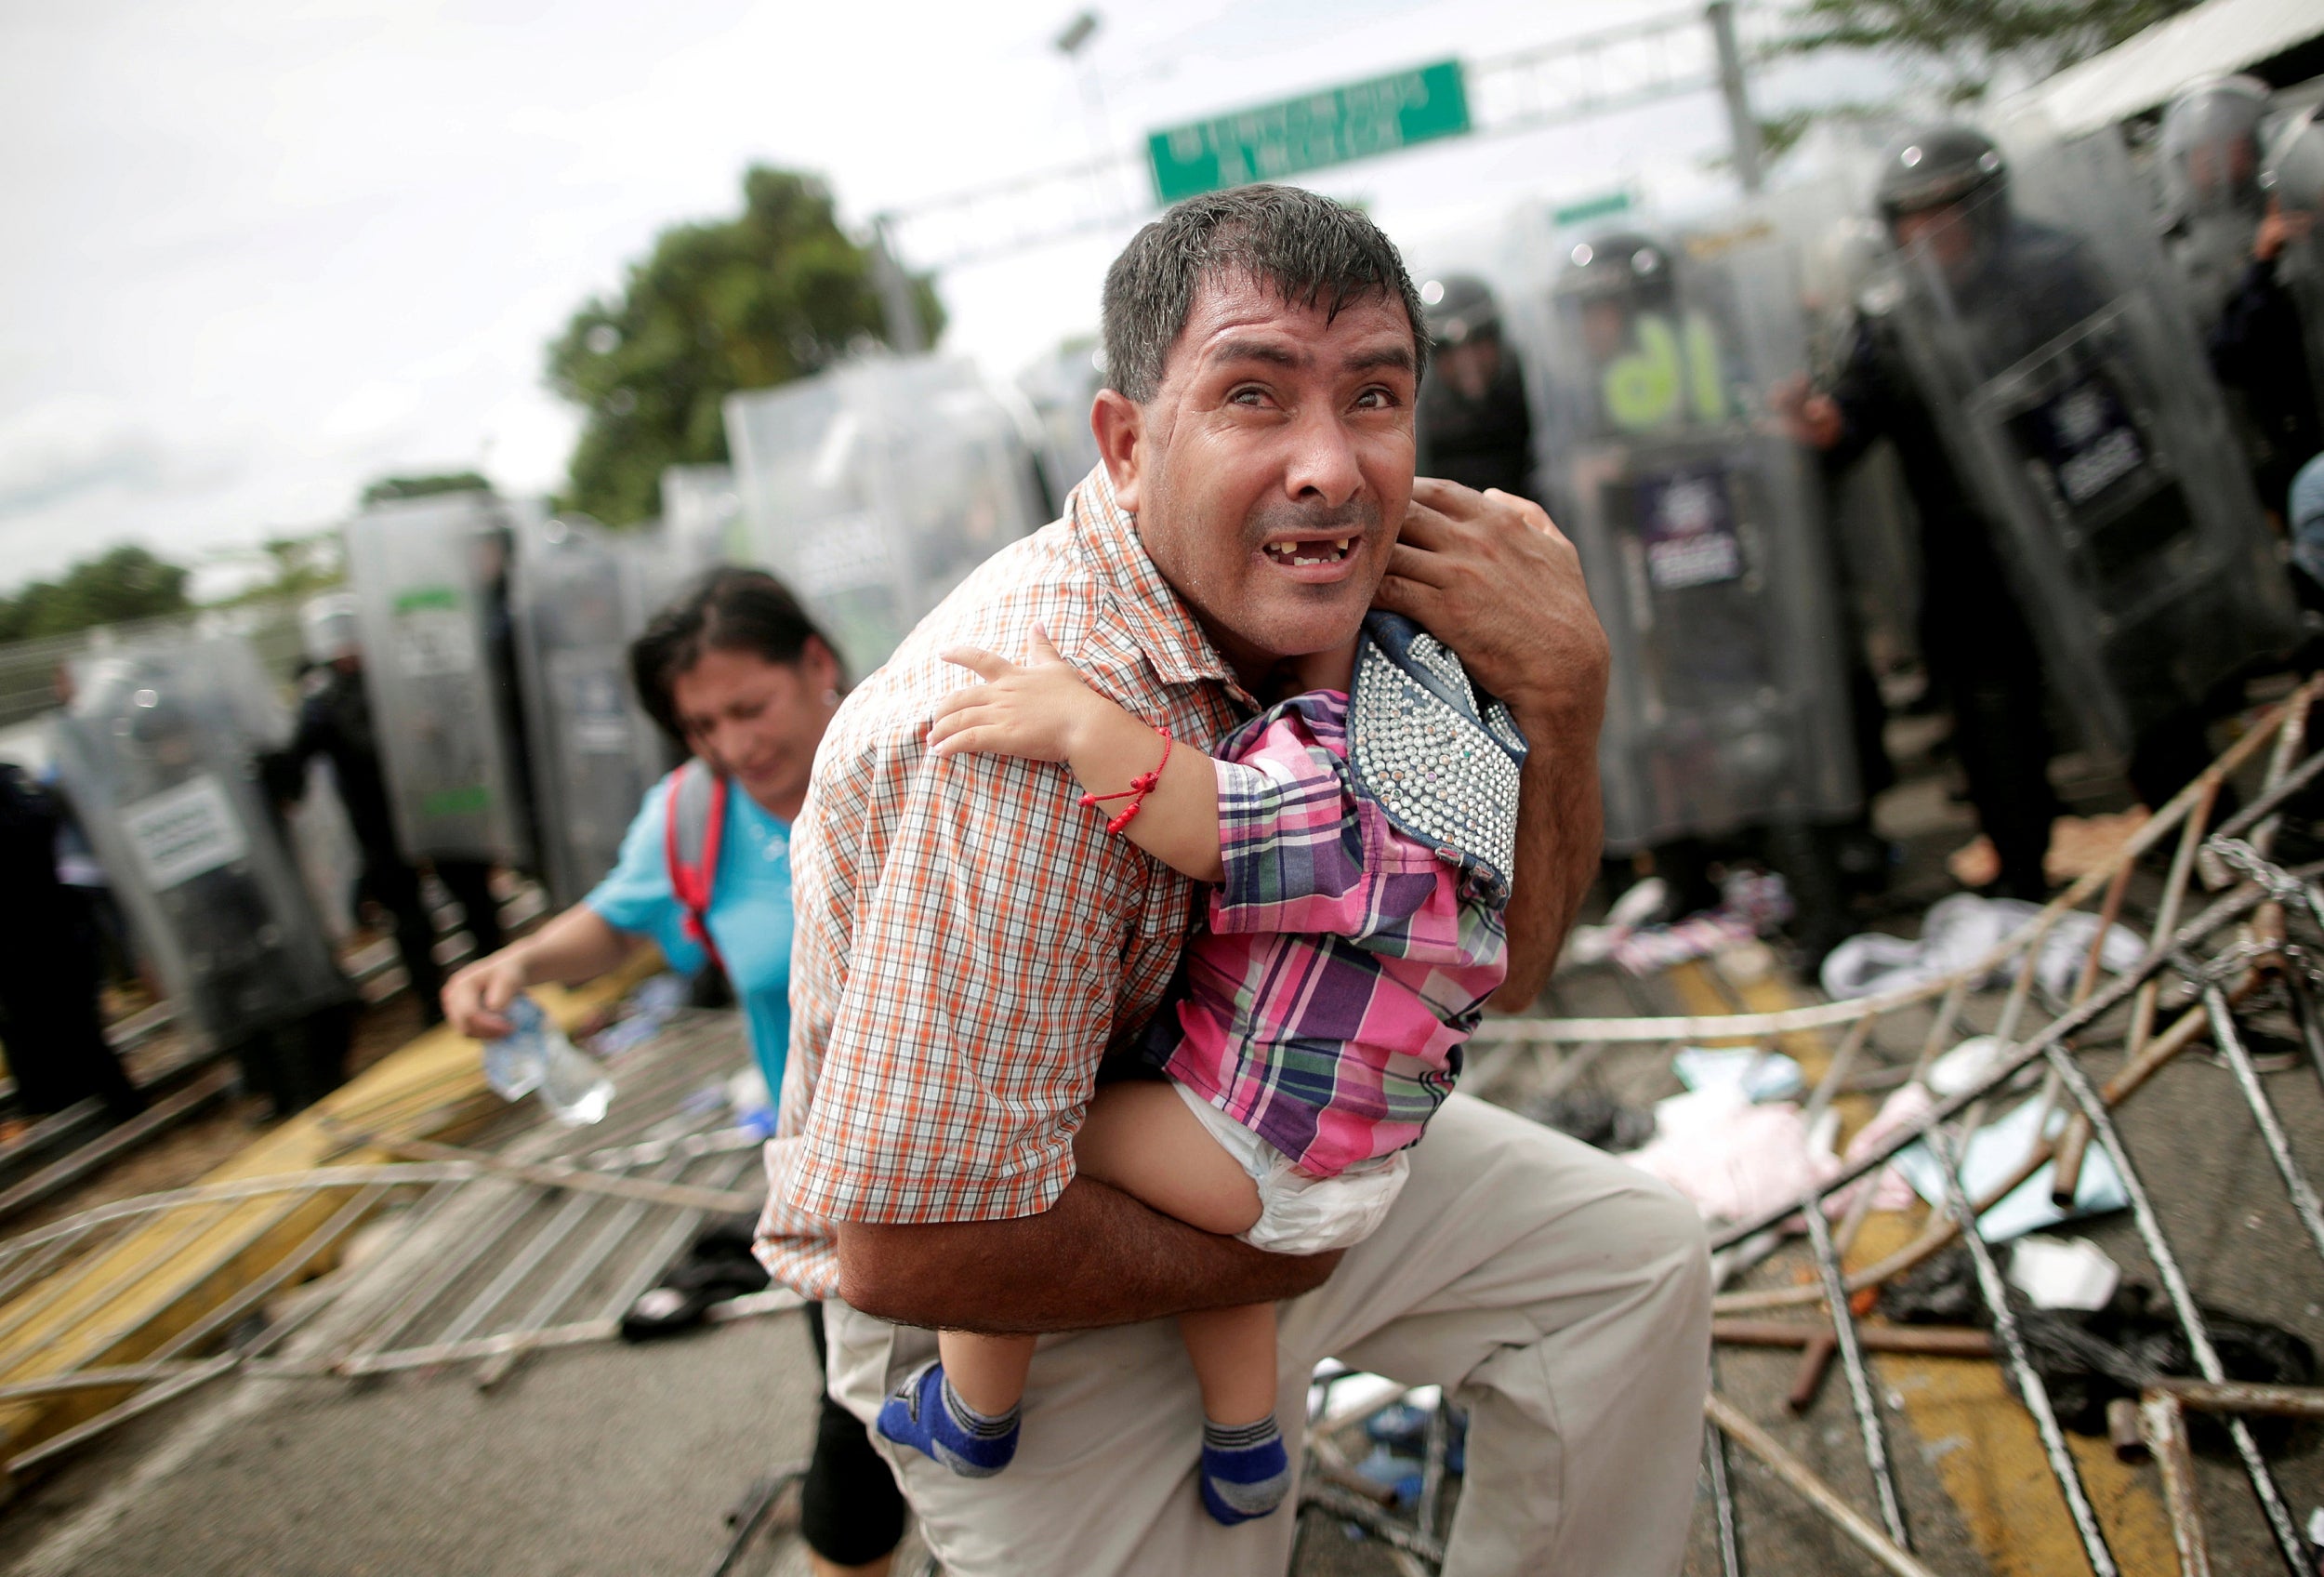 A Honduran migrant protects his child, as part of a caravan trying to reach the US stormed a border checkpoint in Guatemala near Mexico in October